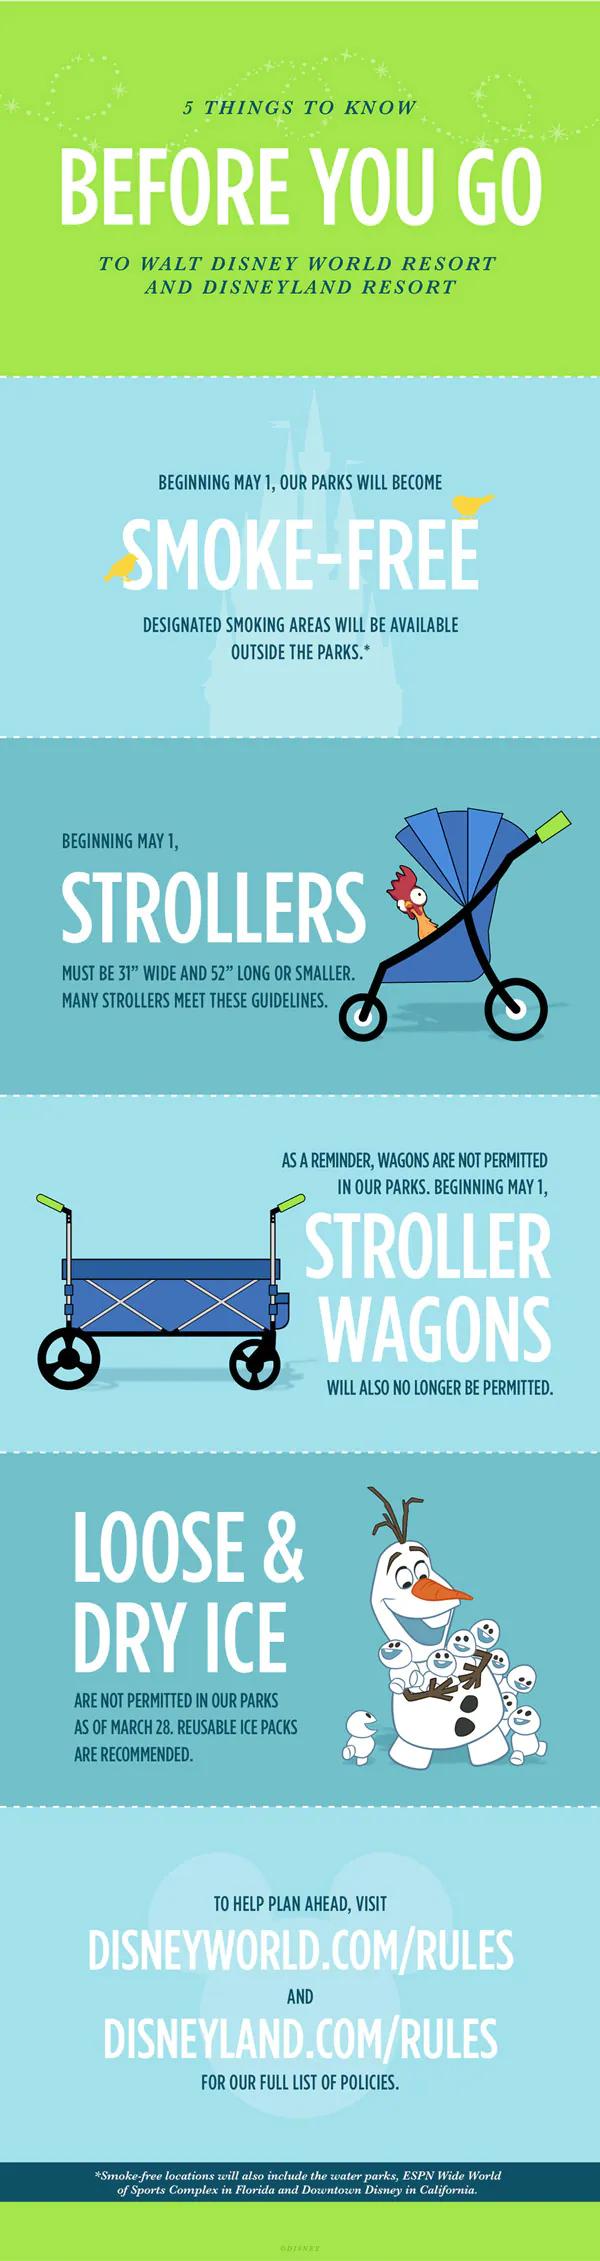 Disney Parks Updates Stroller Policy Effective May 1, 2019 